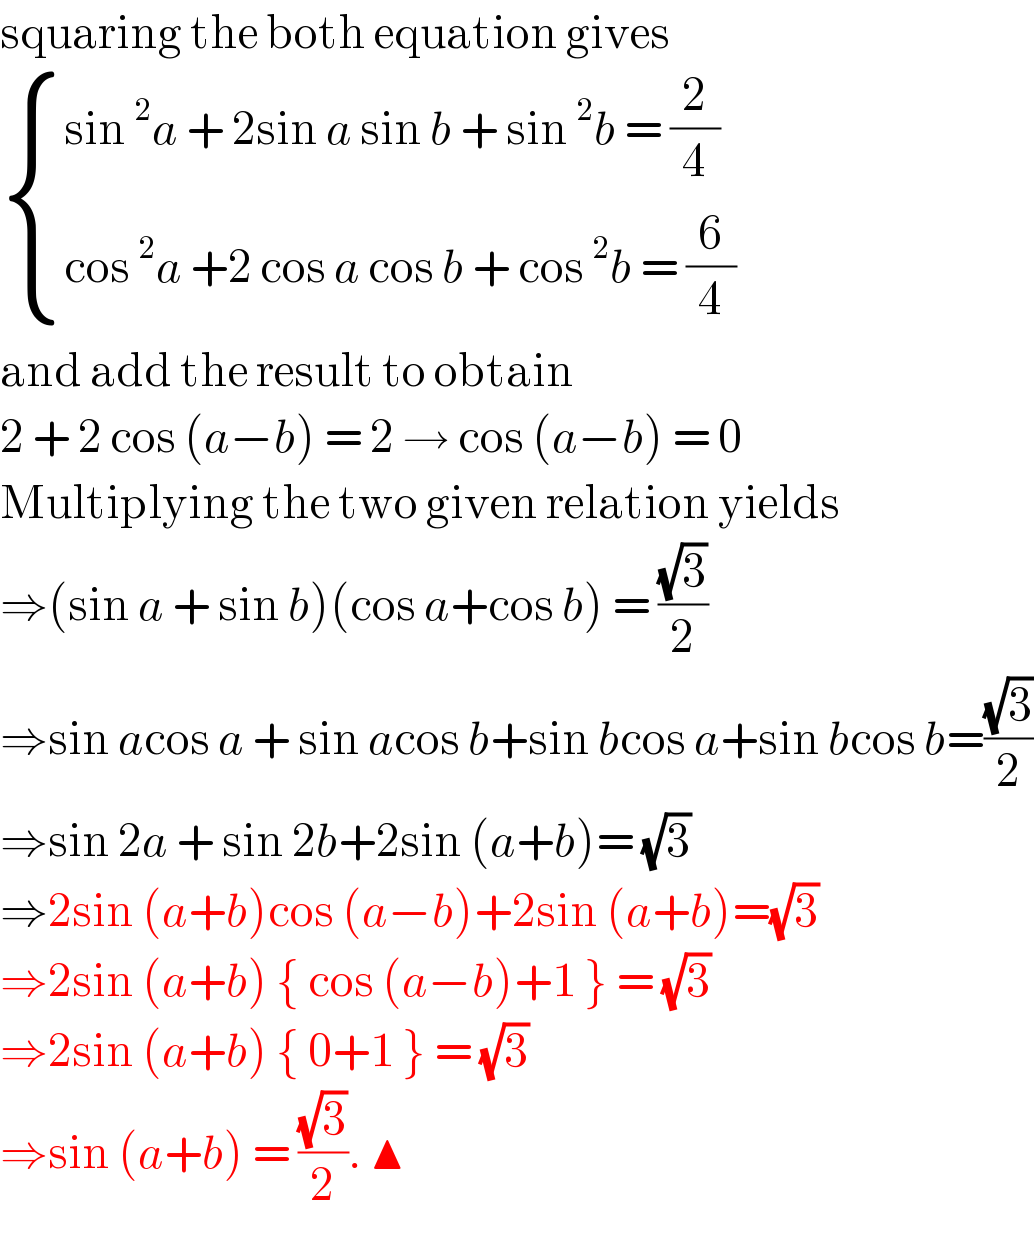 squaring the both equation gives   { ((sin^2 a + 2sin a sin b + sin^2 b = (2/4))),((cos^2 a +2 cos a cos b + cos^2 b = (6/4))) :}  and add the result to obtain   2 + 2 cos (a−b) = 2 → cos (a−b) = 0  Multiplying the two given relation yields  ⇒(sin a + sin b)(cos a+cos b) = ((√3)/2)  ⇒sin acos a + sin acos b+sin bcos a+sin bcos b=((√3)/2)  ⇒sin 2a + sin 2b+2sin (a+b)= (√3)  ⇒2sin (a+b)cos (a−b)+2sin (a+b)=(√3)  ⇒2sin (a+b) { cos (a−b)+1 } = (√3)   ⇒2sin (a+b) { 0+1 } = (√3)  ⇒sin (a+b) = ((√3)/2). ▲  